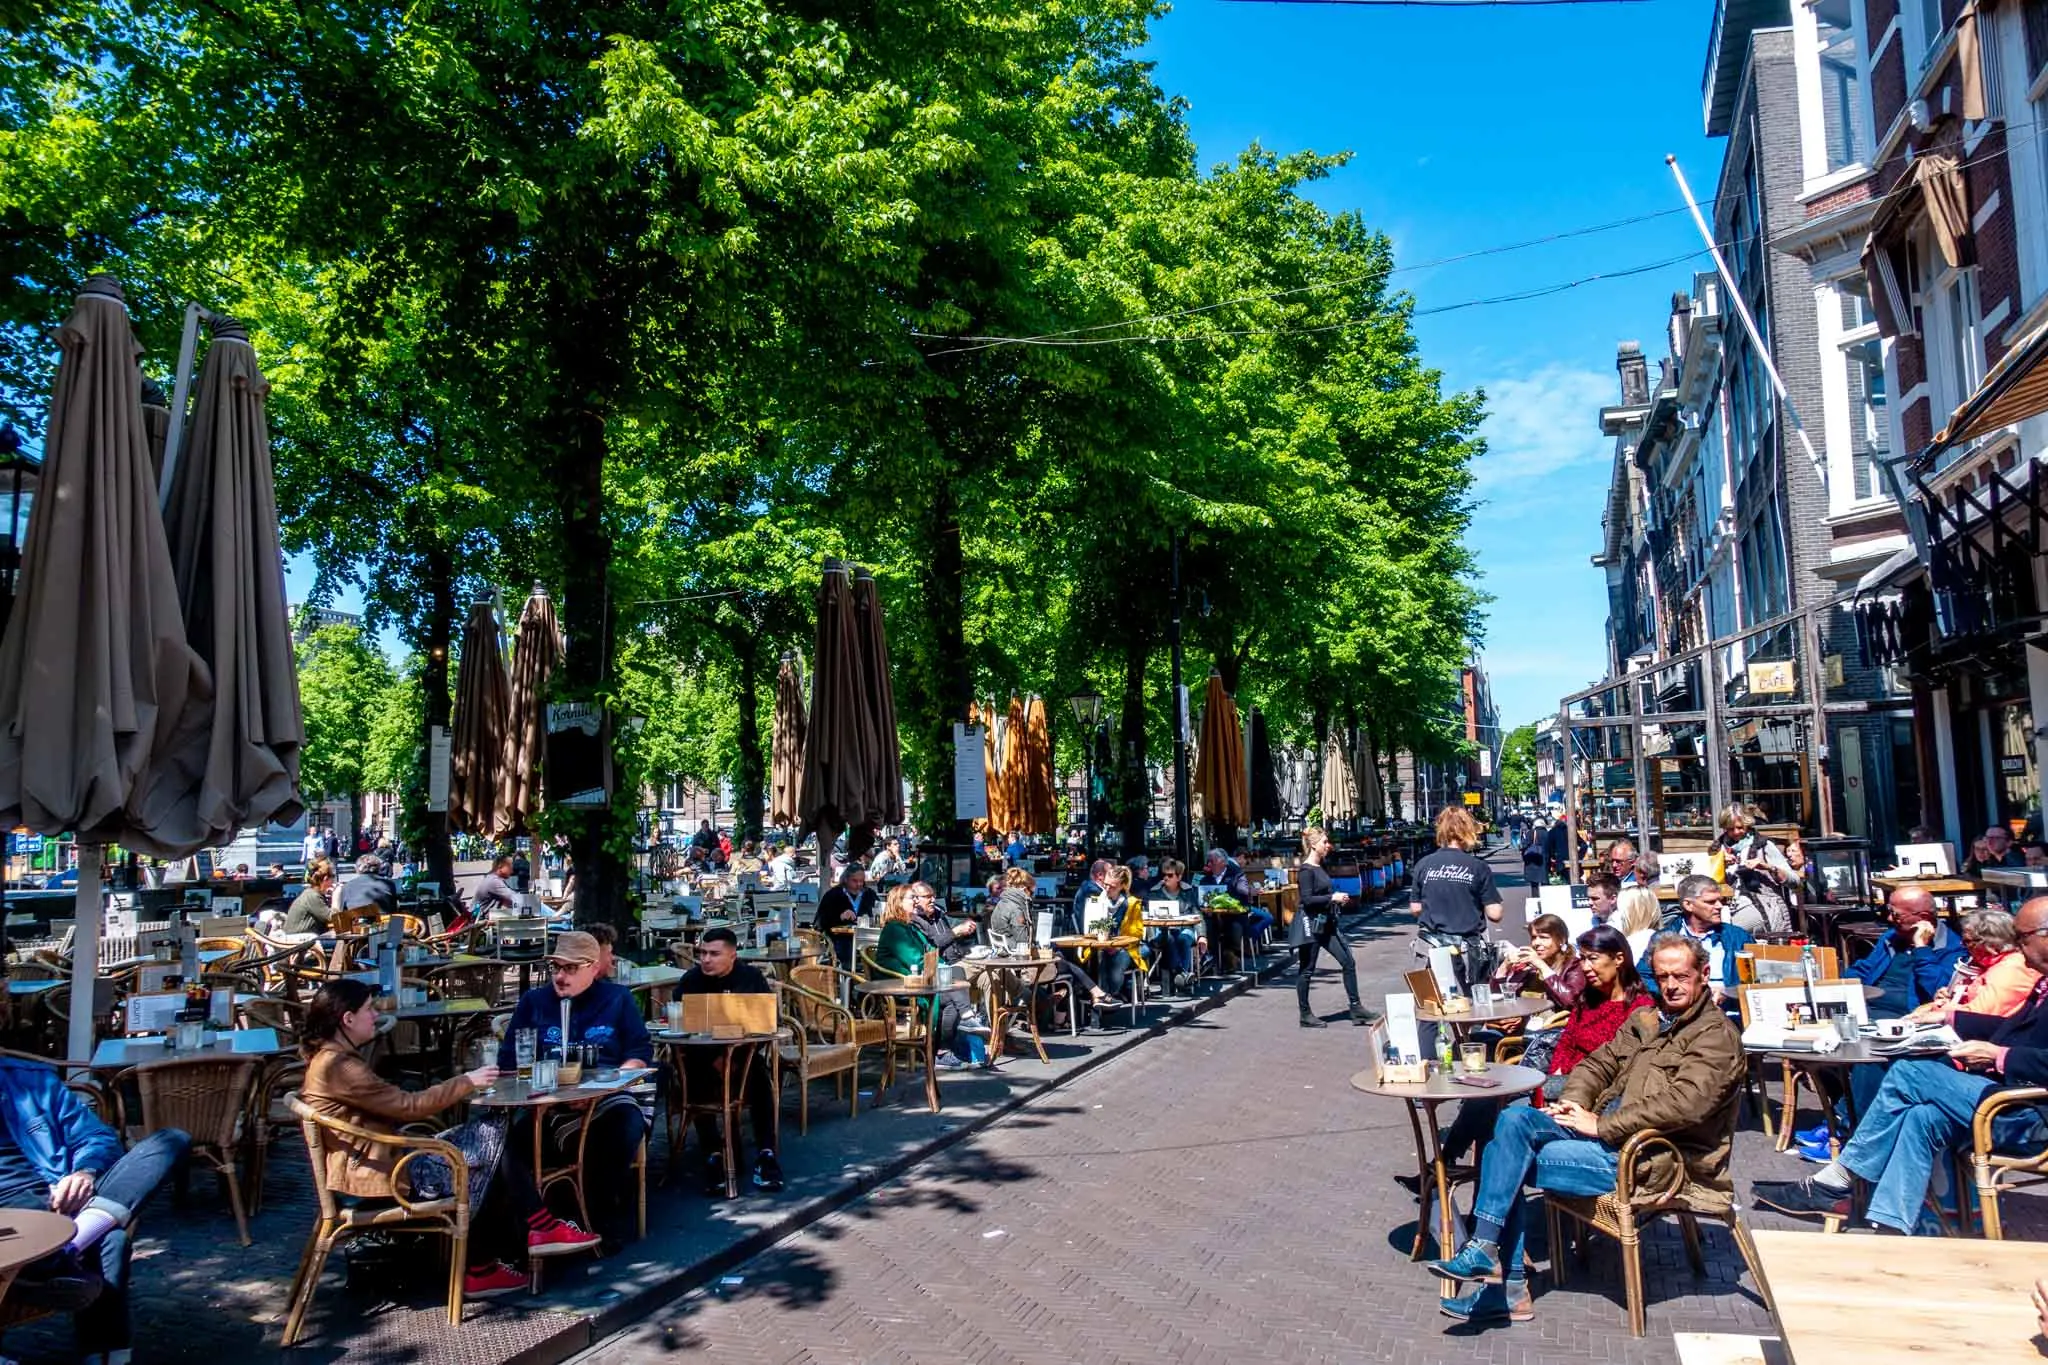 People at outdoor cafes on a tree-lined square.